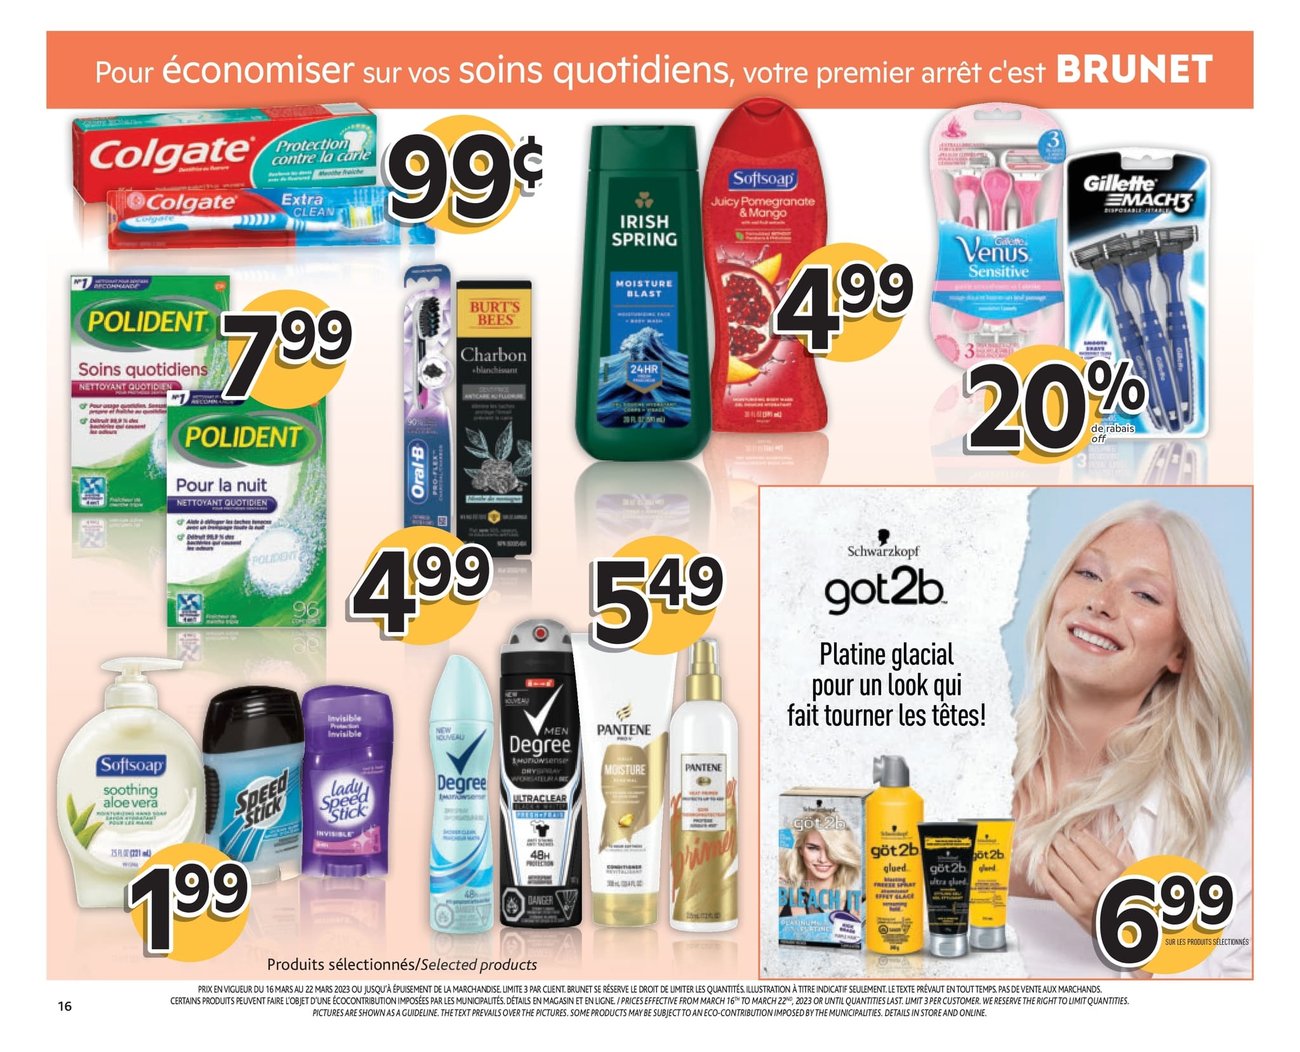 Brunet - Weekly Flyer Specials - Page 4